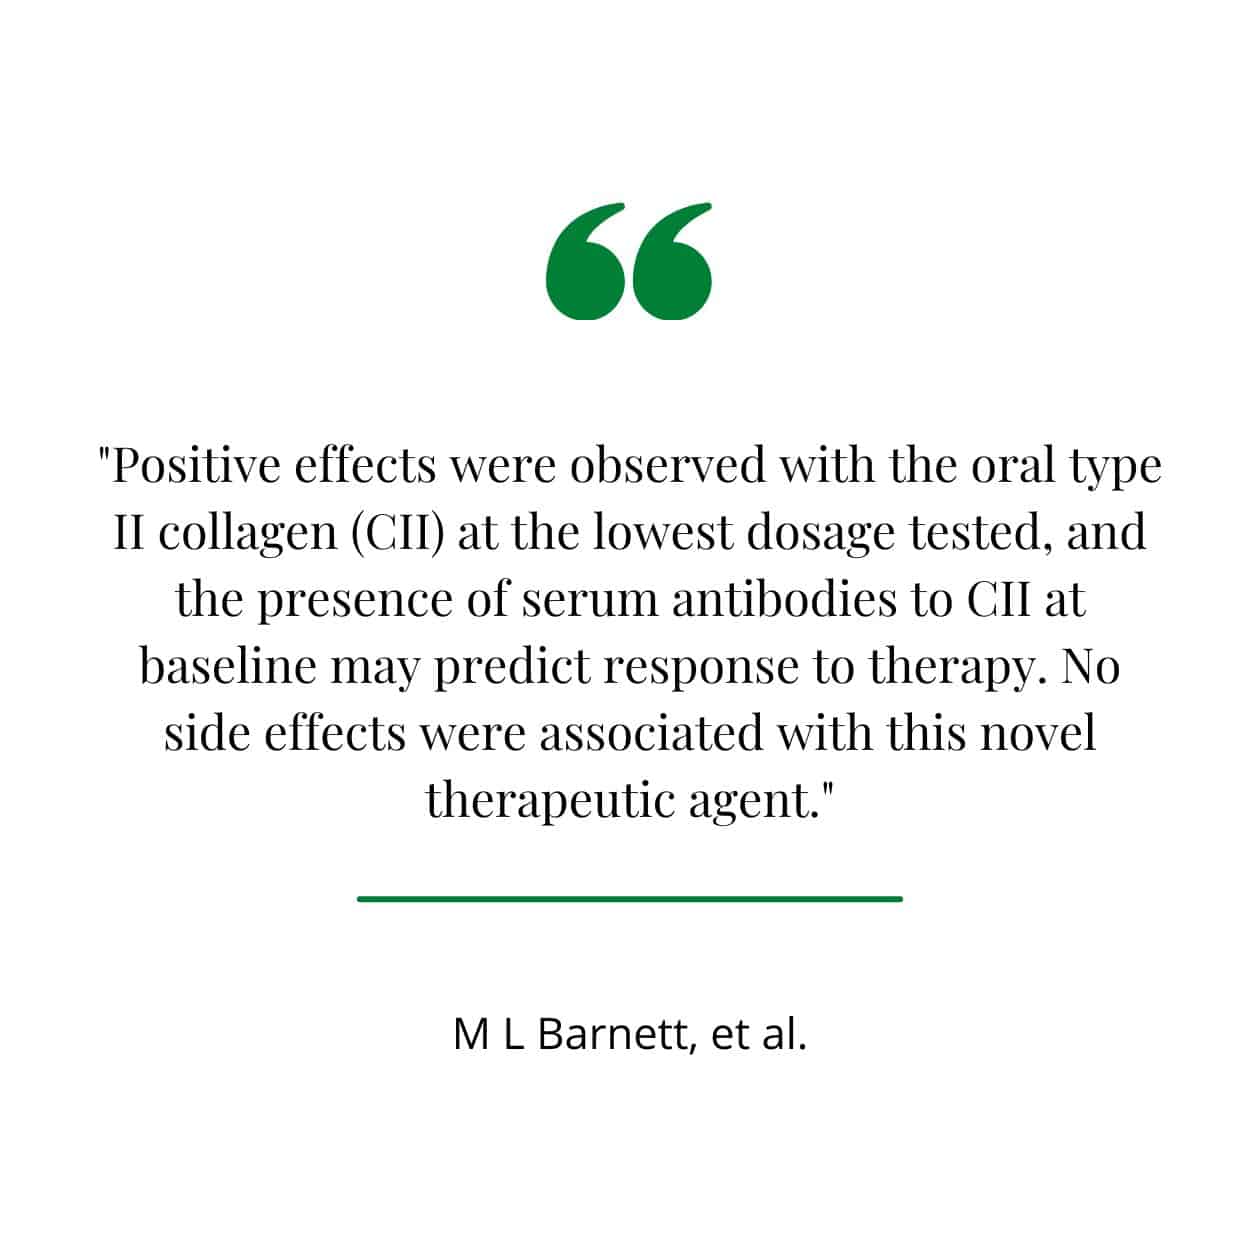 Collagen for rheumatoid arthritis quote from PubMed published study.